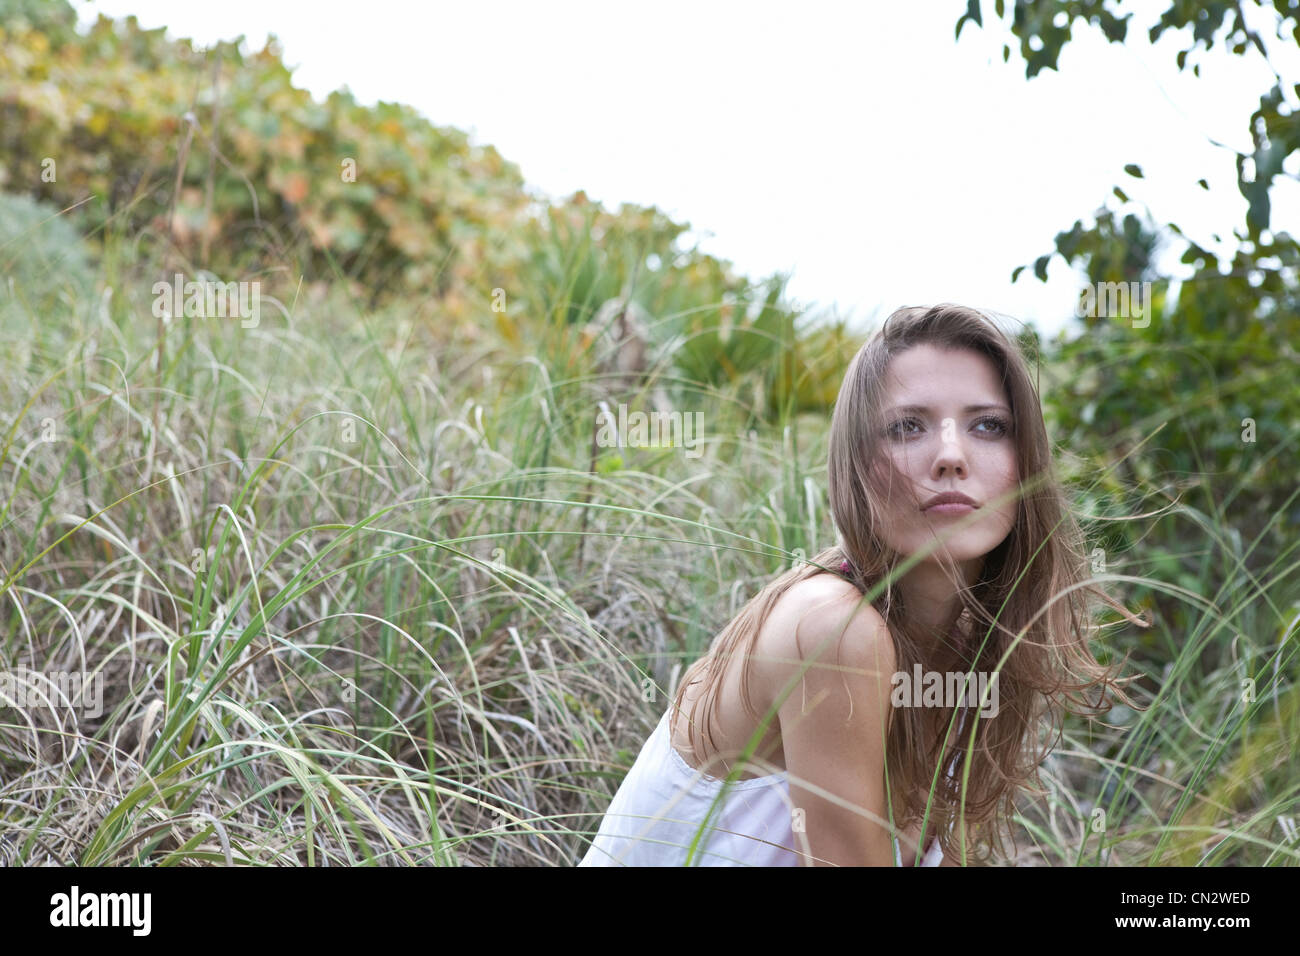 Young woman sitting in grass, looking away Stock Photo